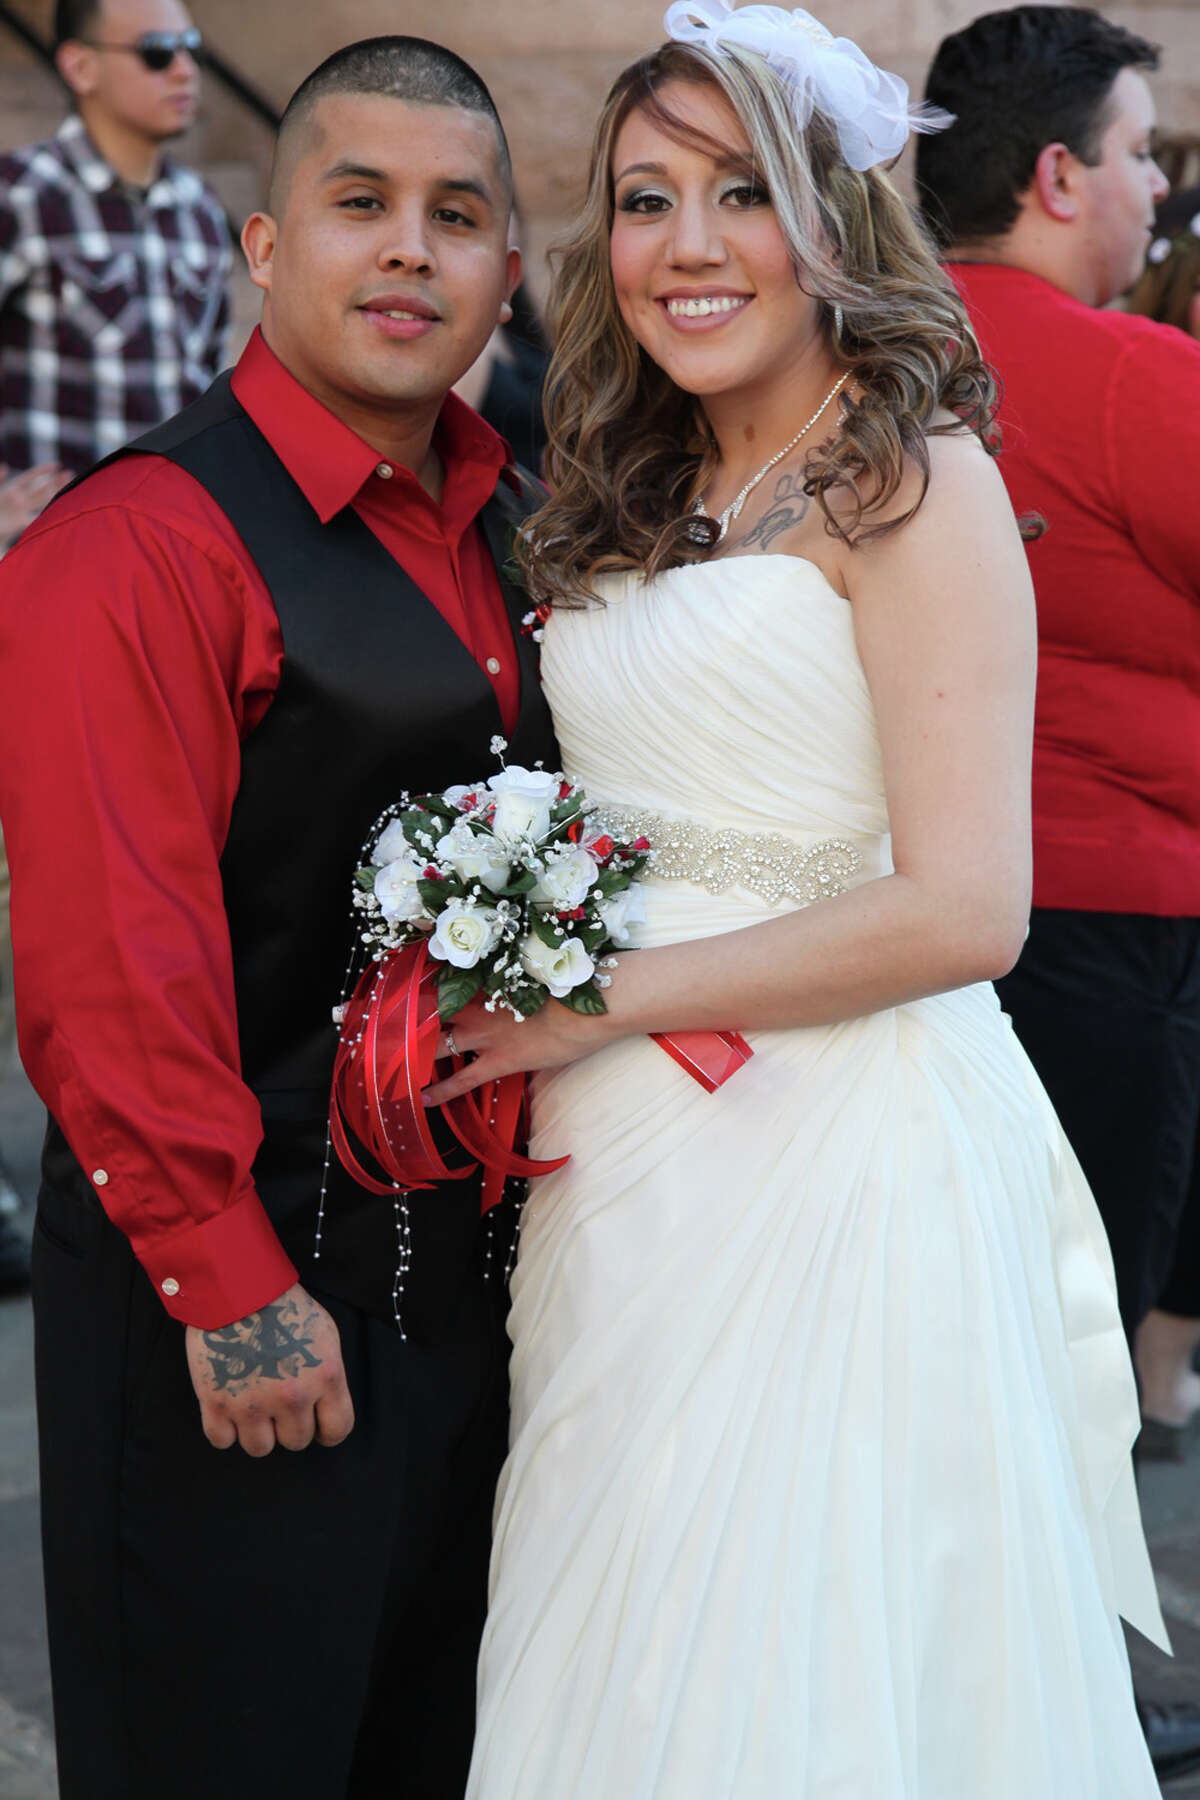 Couples got married at the Bexar County Courthouse on Valentine's Day, Feb. 14, 2014.